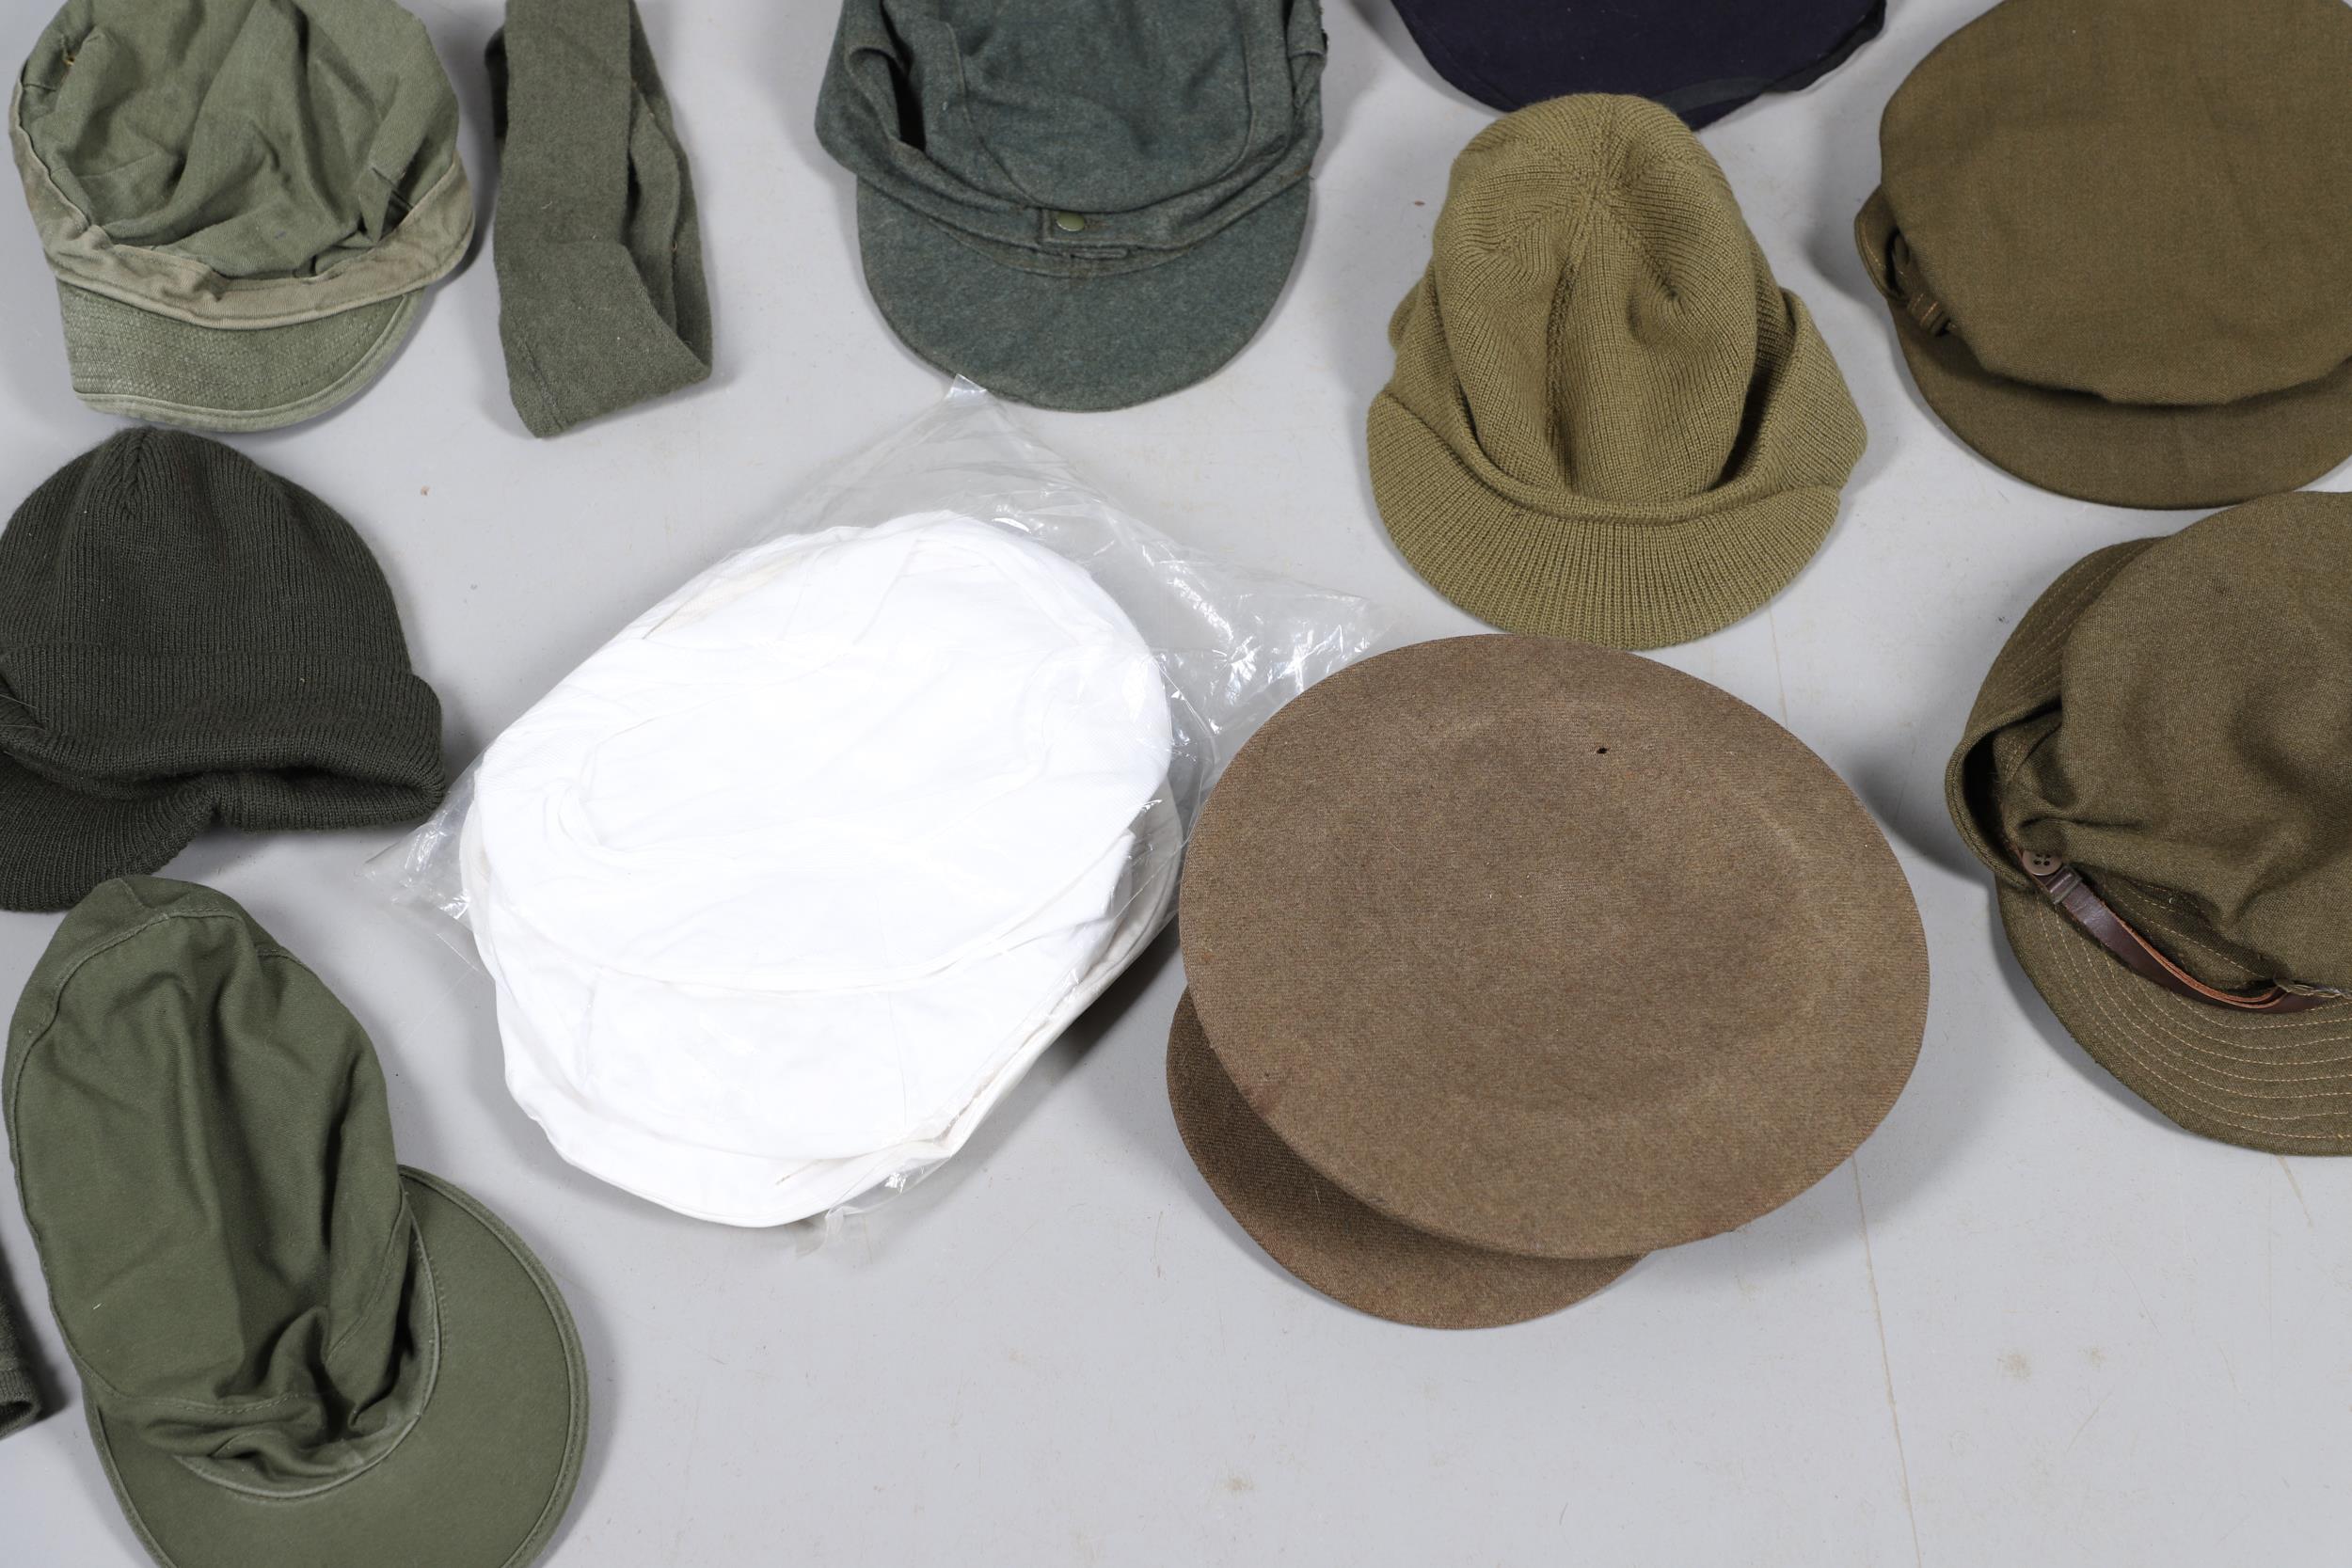 AN EXTENSIVE COLLECTION OF MILITARY UNIFORM CAPS, BERETS AND OTHER ITEMS. SECOND WORLD WAR AND LATER - Image 14 of 17